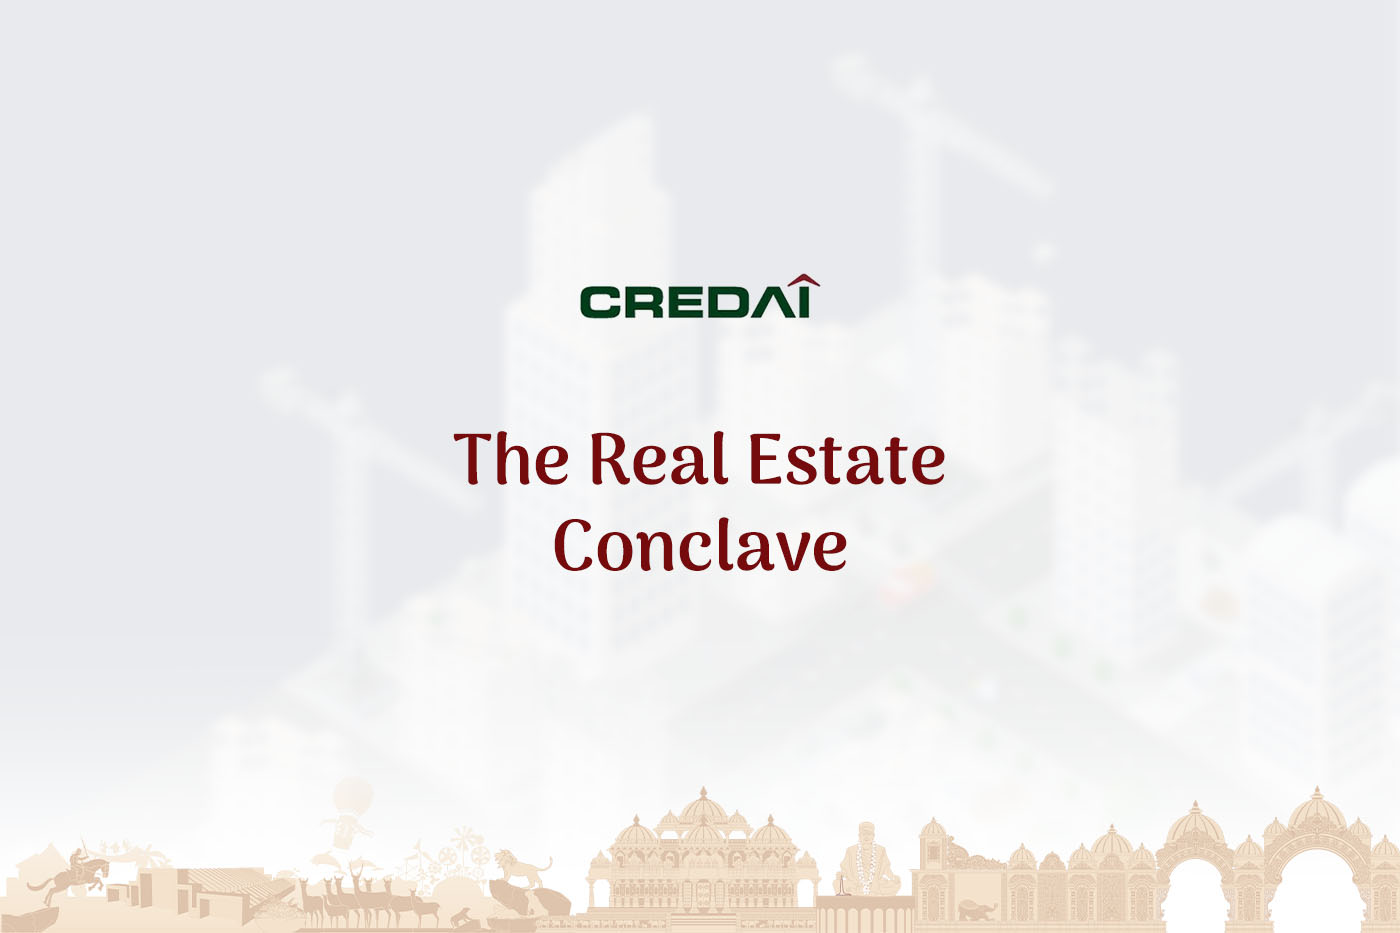 The Real Estate Conclave